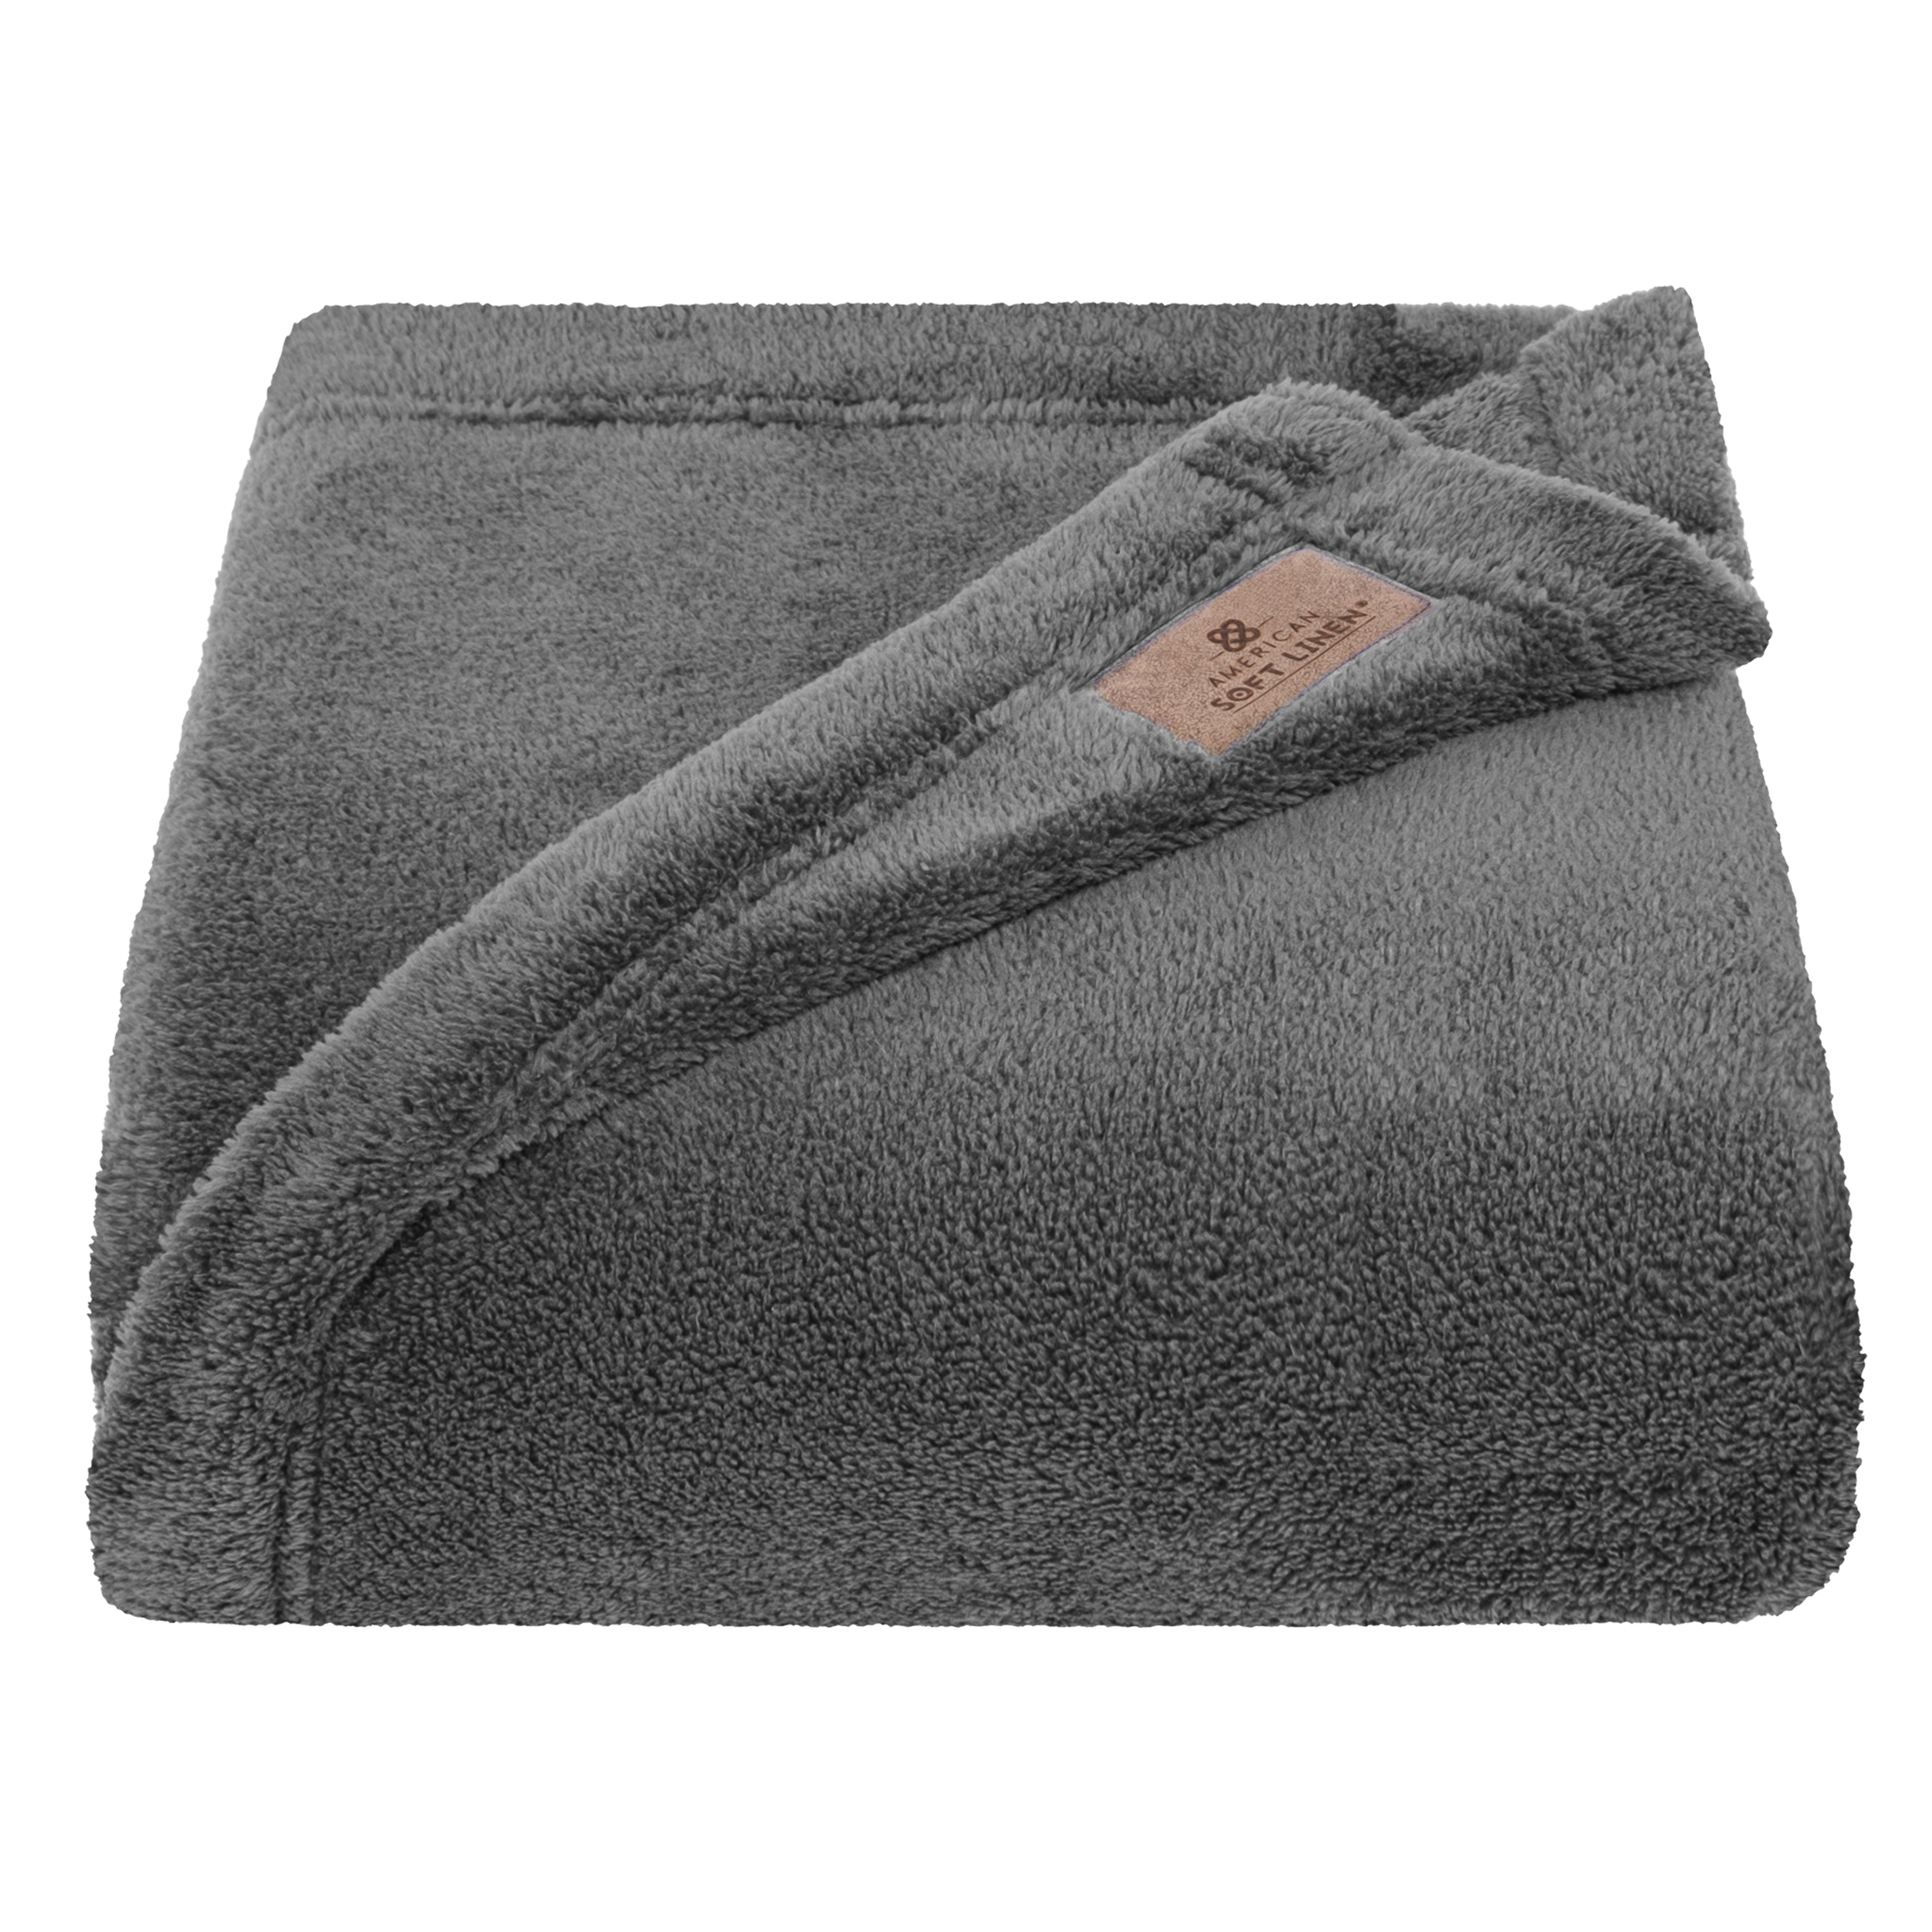 American Soft Linen Bedding Fleece Blanket, Plush Fuzzy Cozy Soft Blanket for Bed, Sofa, Couch, Queen Size 85x90 Inches / Gray